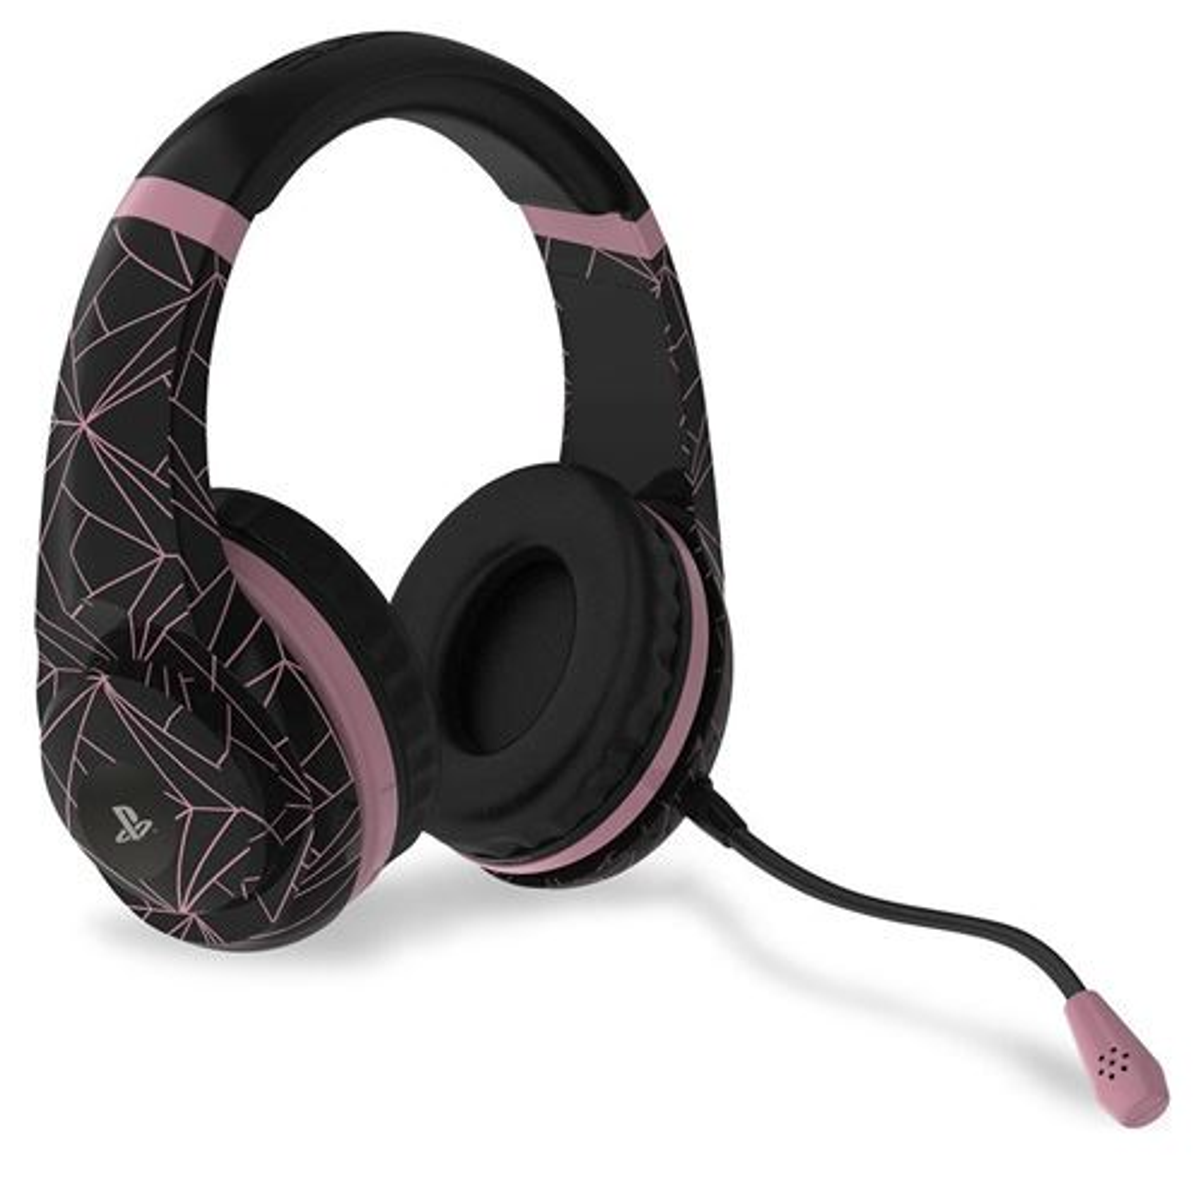 Schwarz/Roségold 4 ROSE HEADSET GOLD.ED.-ABSTRACT, GAMERS PRO4-70-RGA On-ear BLK Headset Gaming